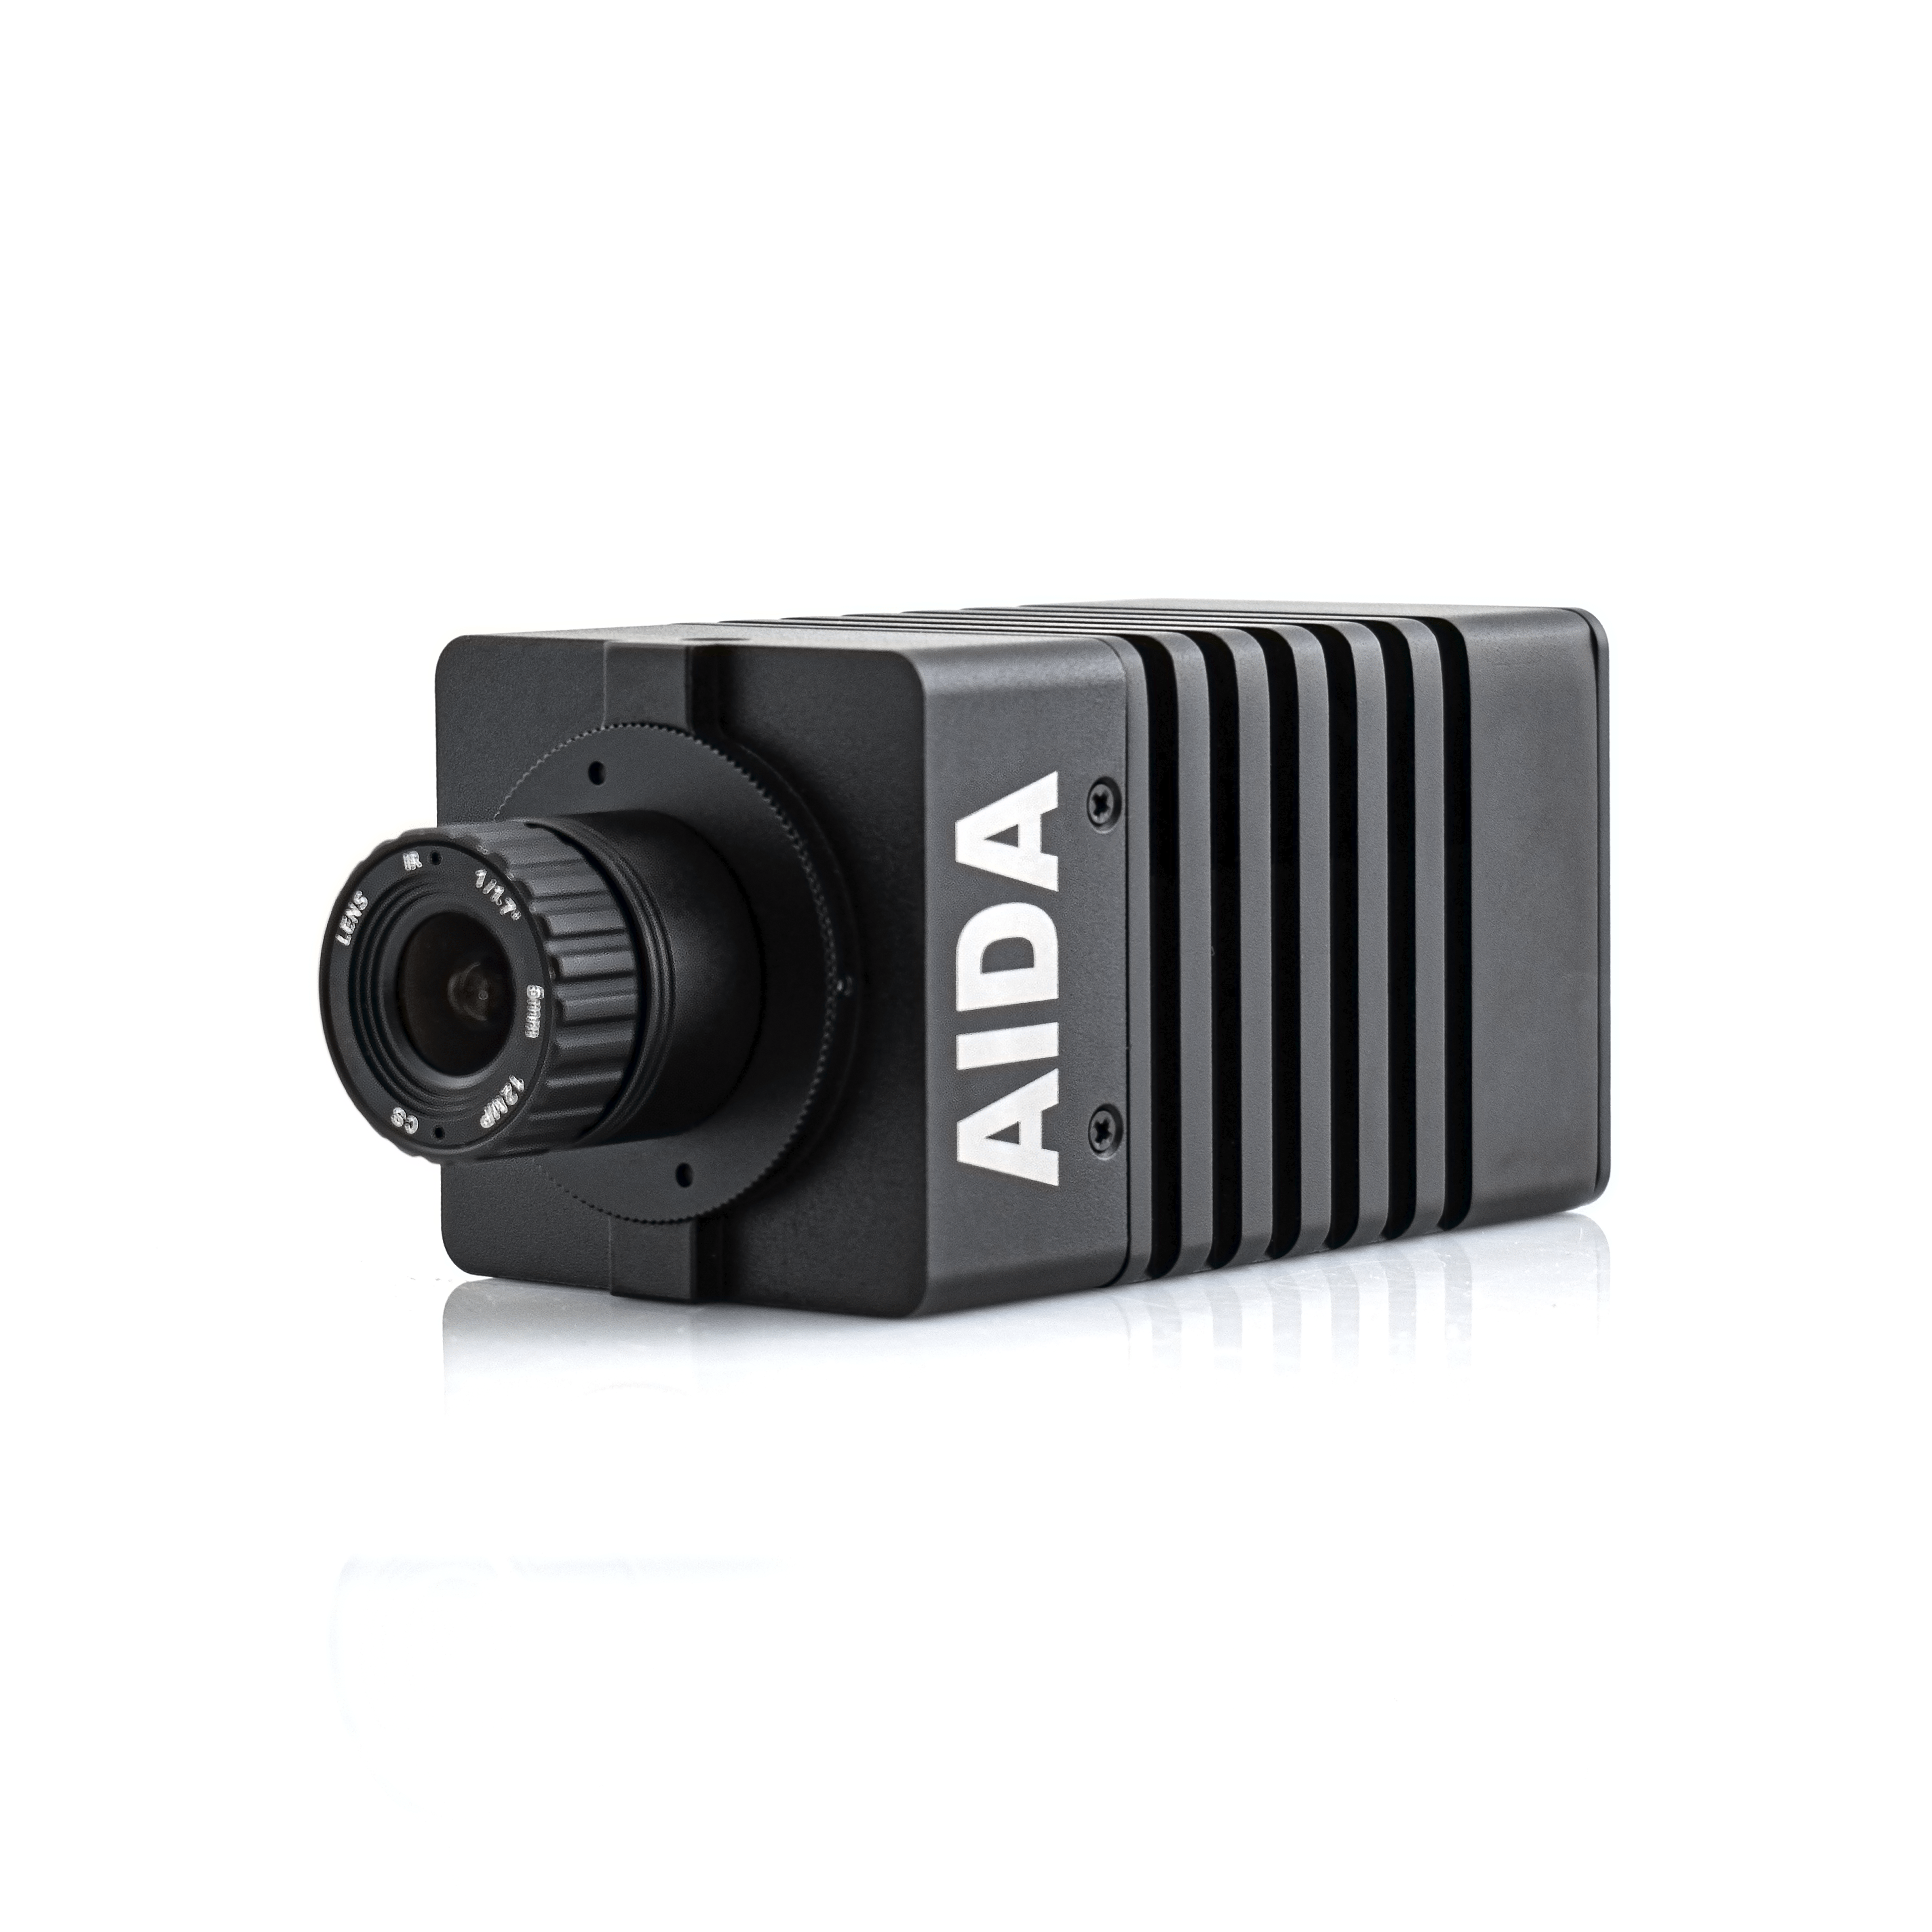 AIDA Imaging UHD-200 4K 60p POV Camera with Varifocal Lens in a Front-Side View